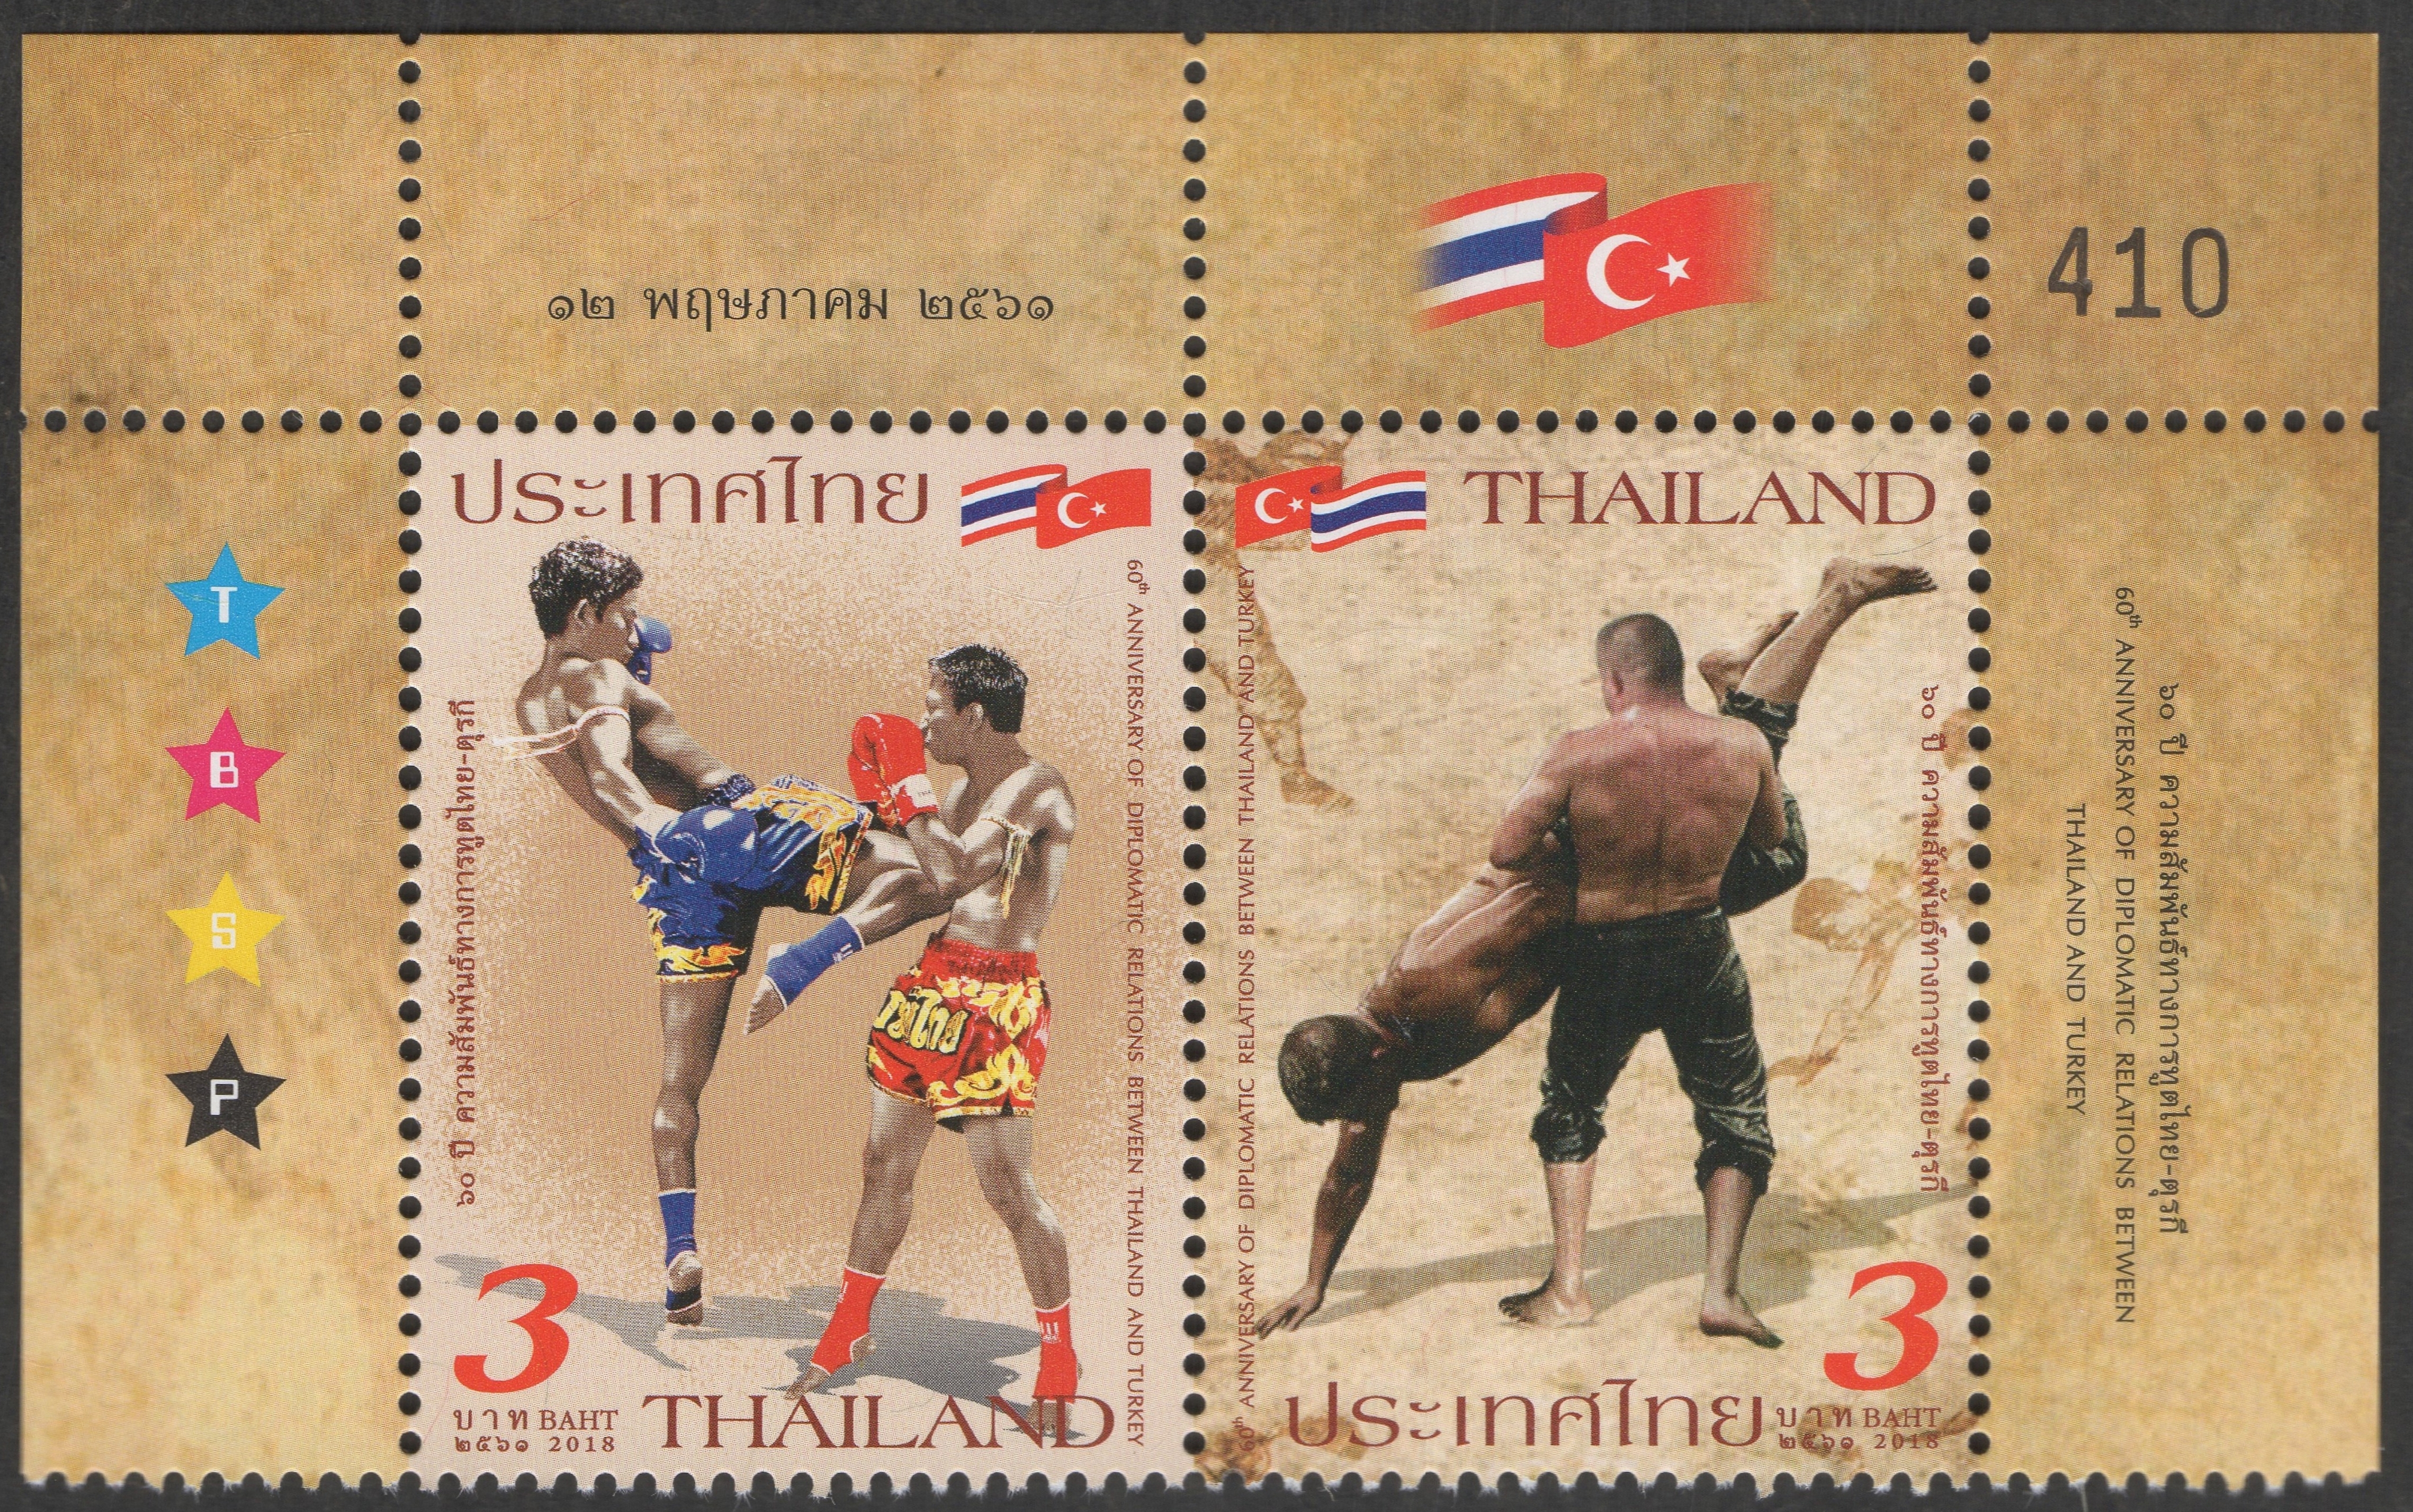 Thailand -Thailand Post #TH-1147, released on May 12, 2018.